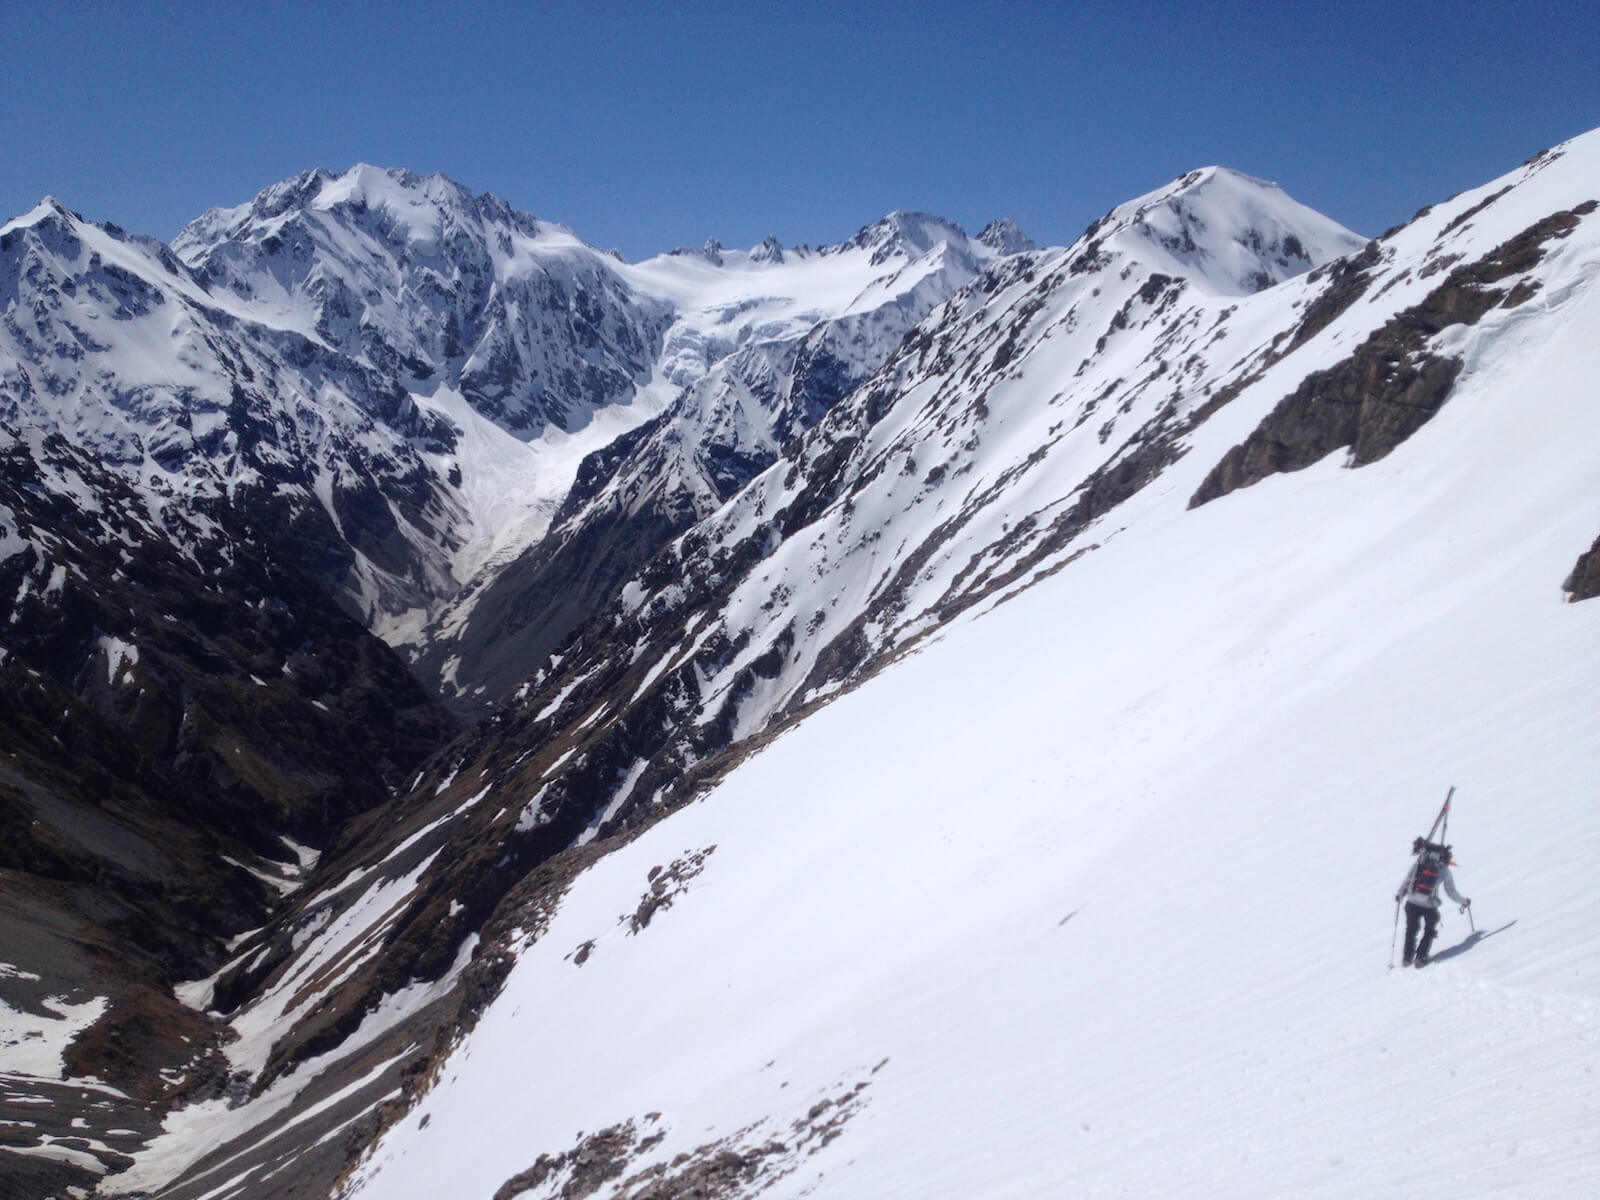 Ski Touring in New Zealand while in the Rakaia Valley and climbing up the Warrior